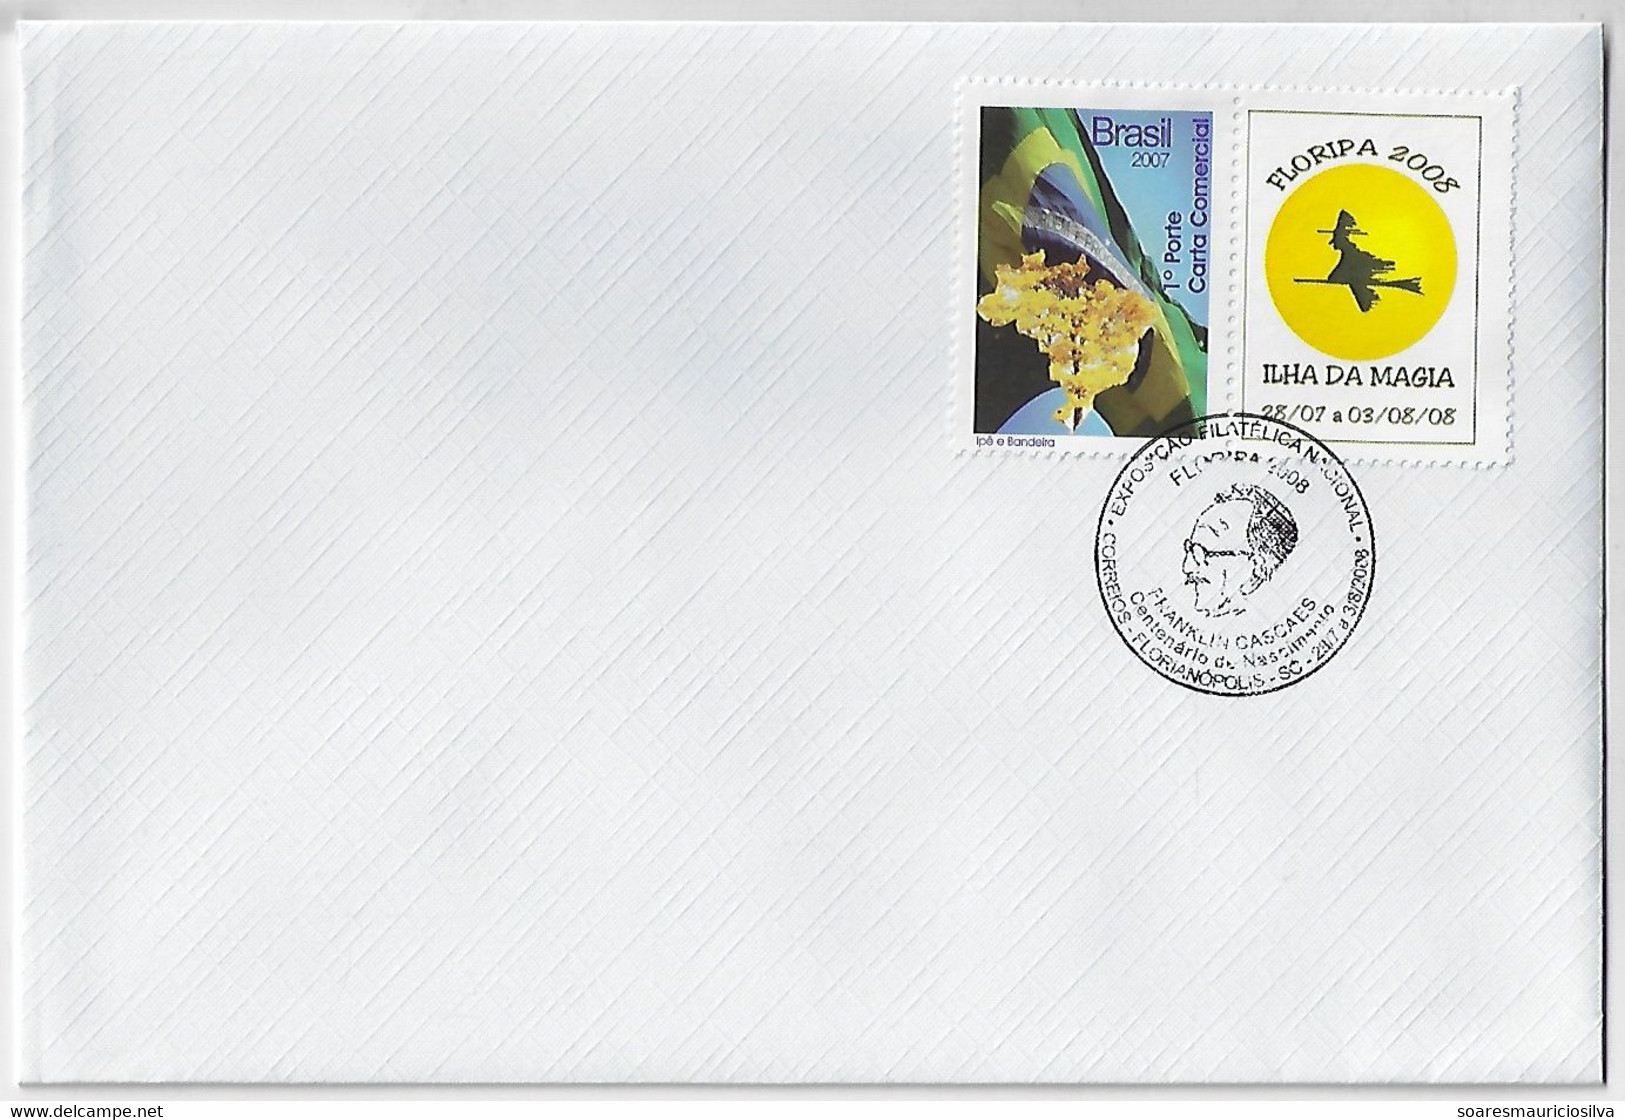 Brazil 2008 Cover Personalized Stamp National Philatelic Exhibition Florianópolis Magic Island Witch In Broom F. Cascaes - Personnalisés